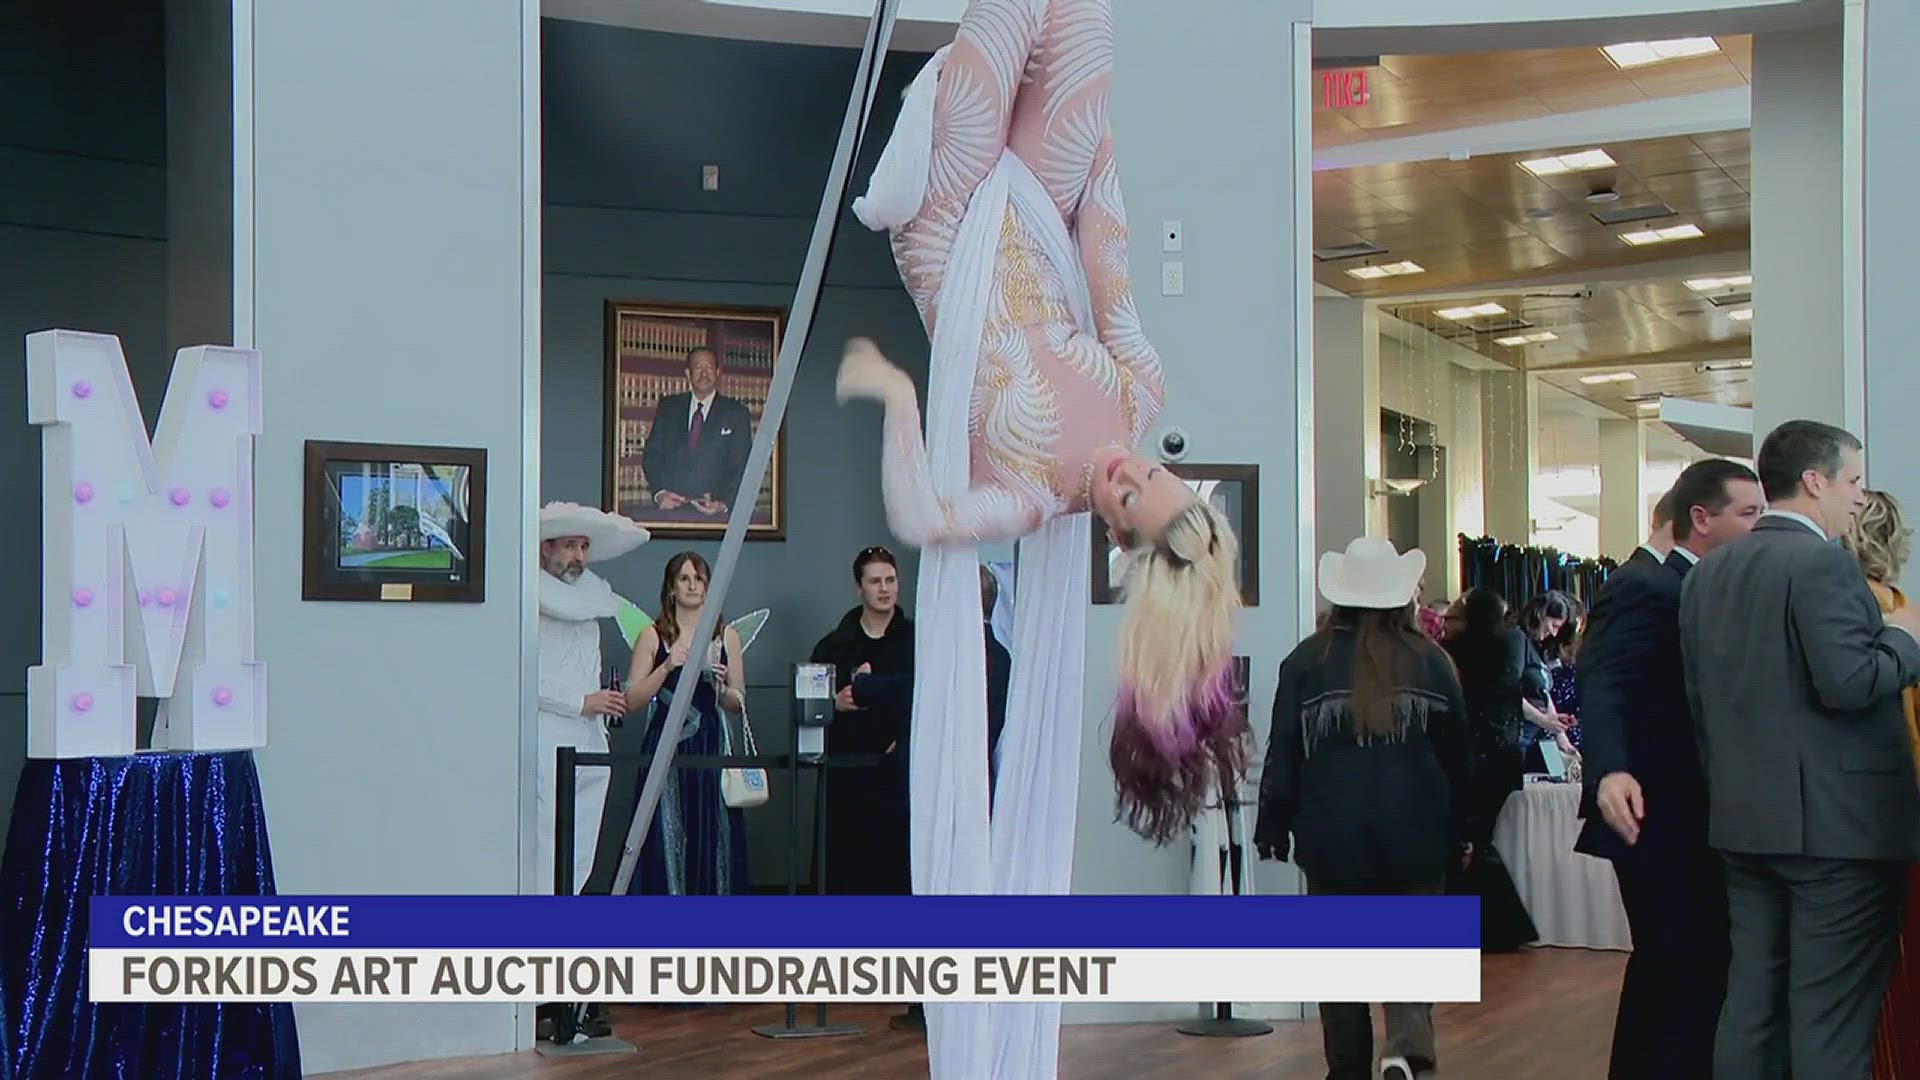 An unconventional art auction for a good cause was held in Chesapeake Saturday.